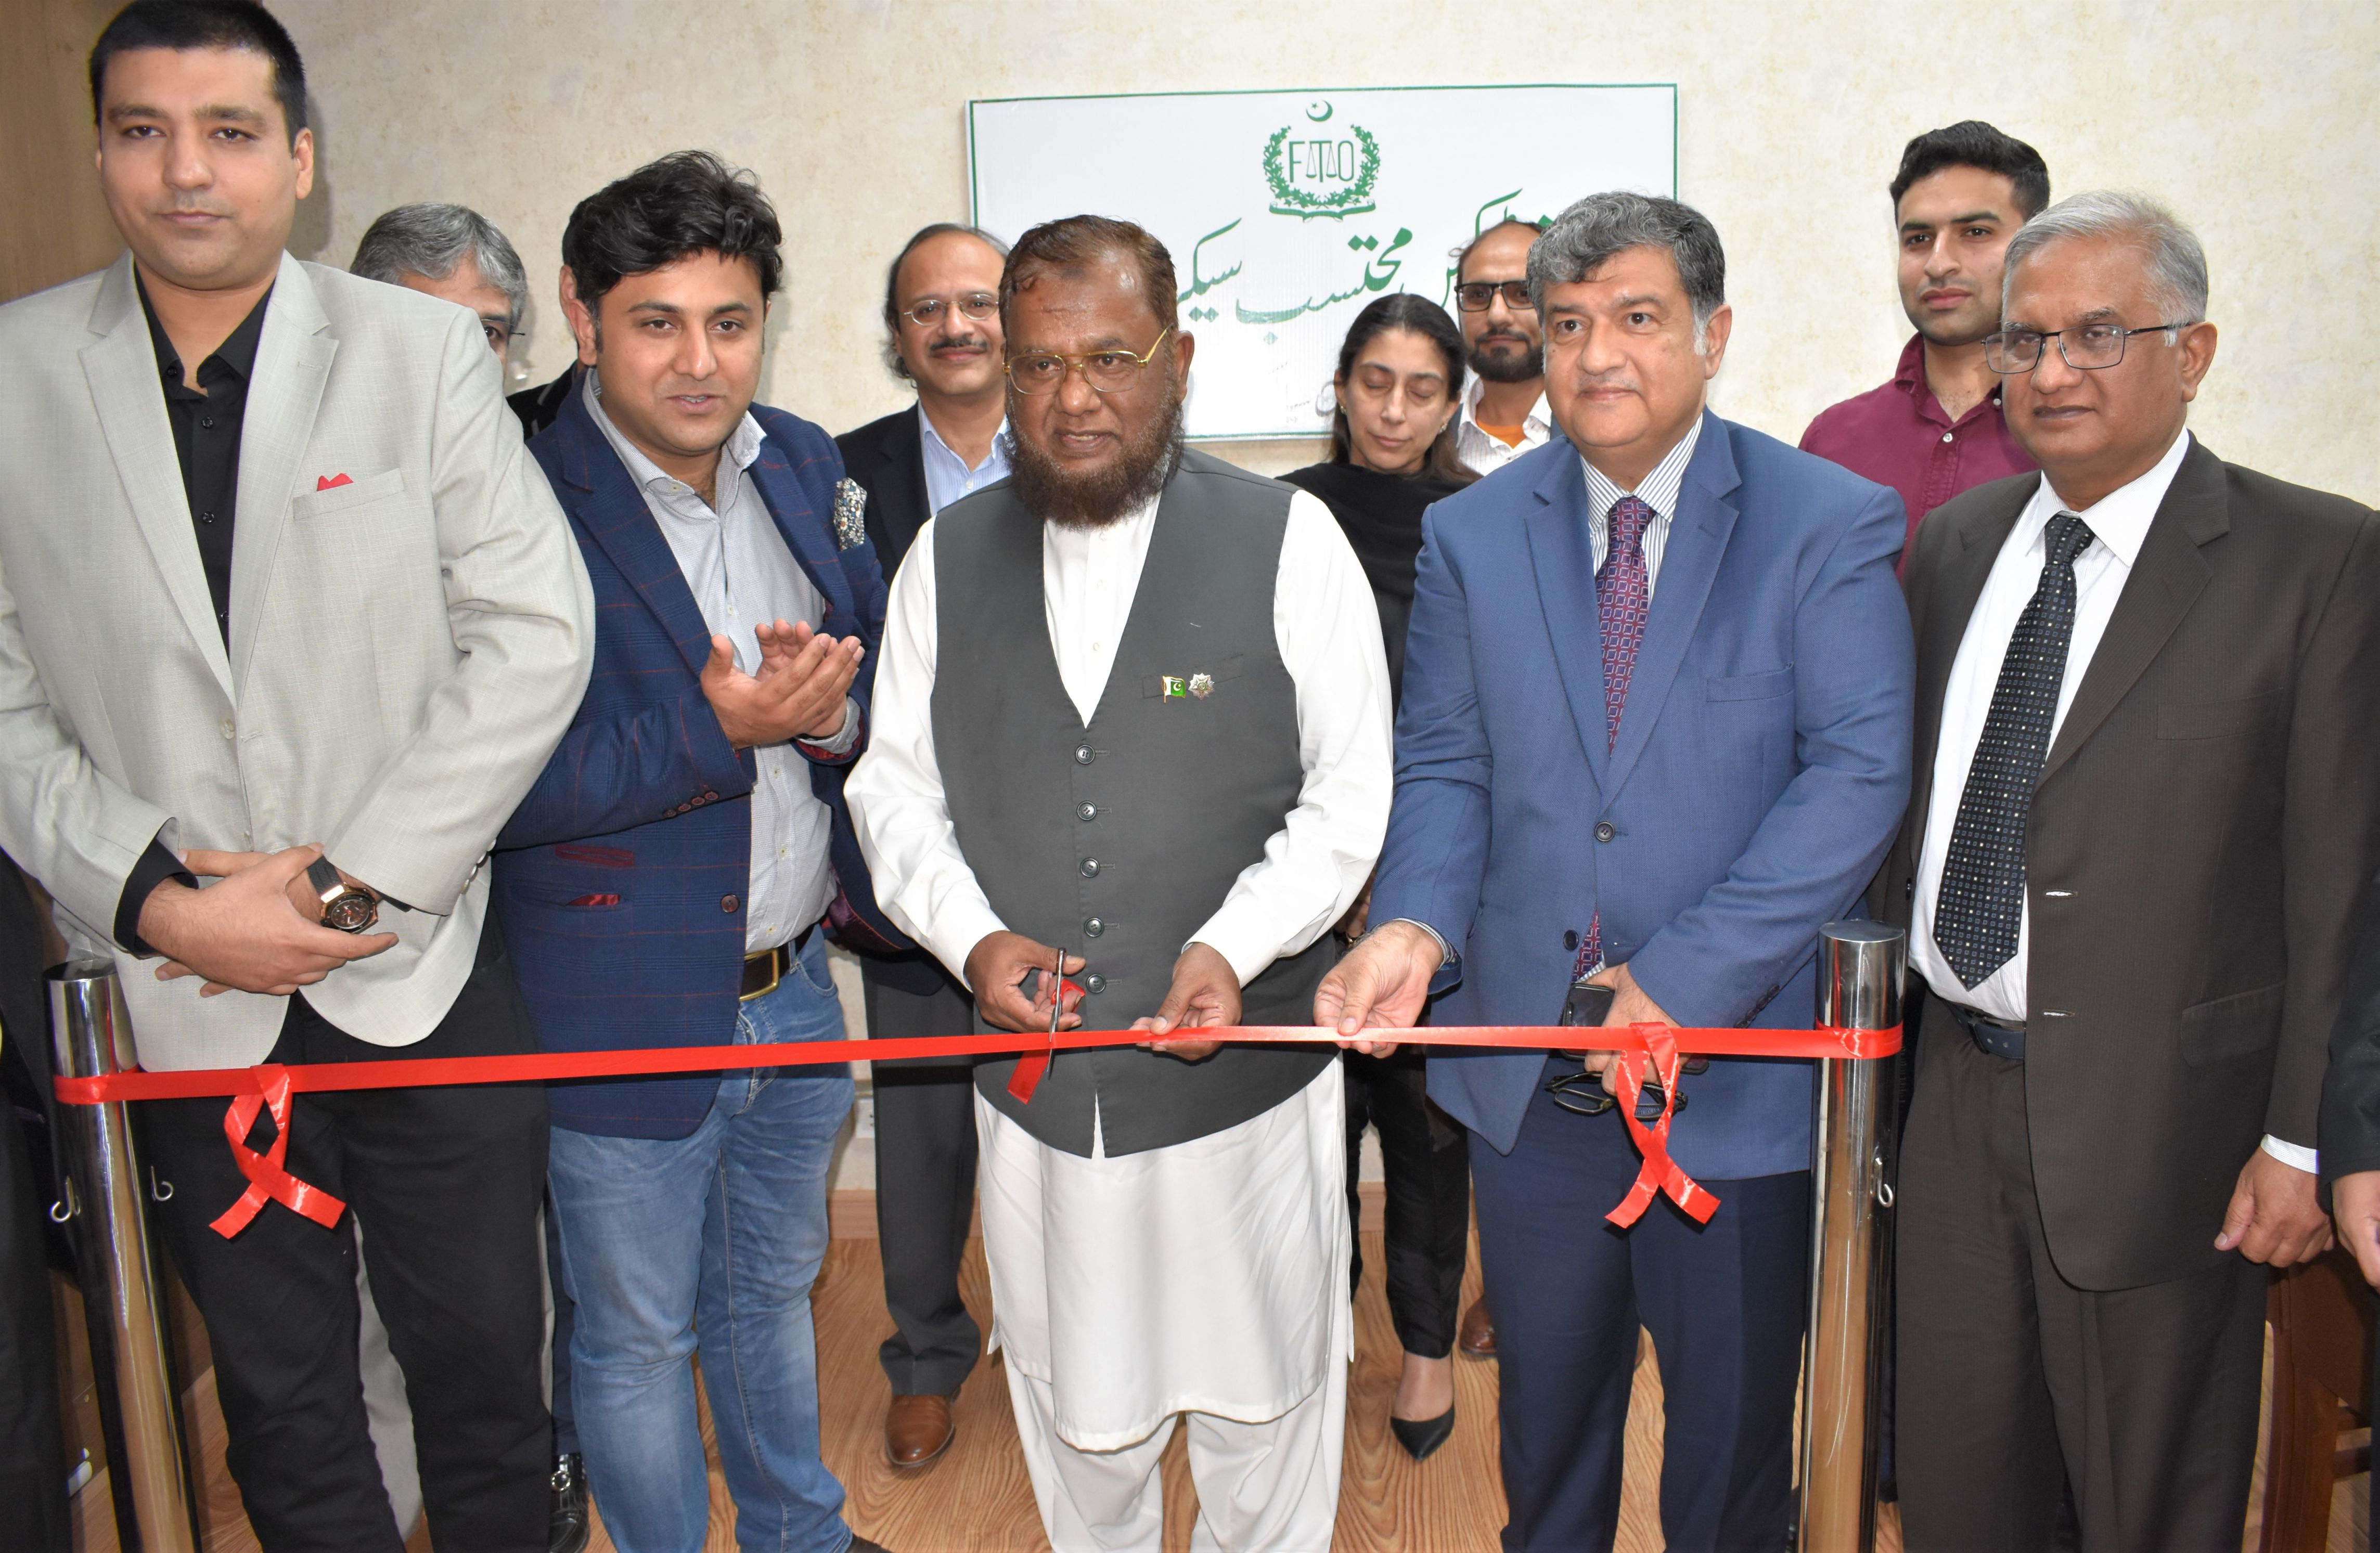 On November 08, 2021, An Inauguration Ceremony of “Federal Tax Ombudsman Desk” was held in Sialkot Chamber of Commerce & Industry for the facilitation of members of SCCI.  Dr. Asif Mahmood Jah, Federal Tax Ombudsman and President, SCCI inaugurated the FTO Facilitation Desk.   Ms. Ambreen Ahmad Tarar, Collector of Customs Sialkot, Senior Vice President, Vice President and Executive Committee, SCCI were also present during the ceremony.